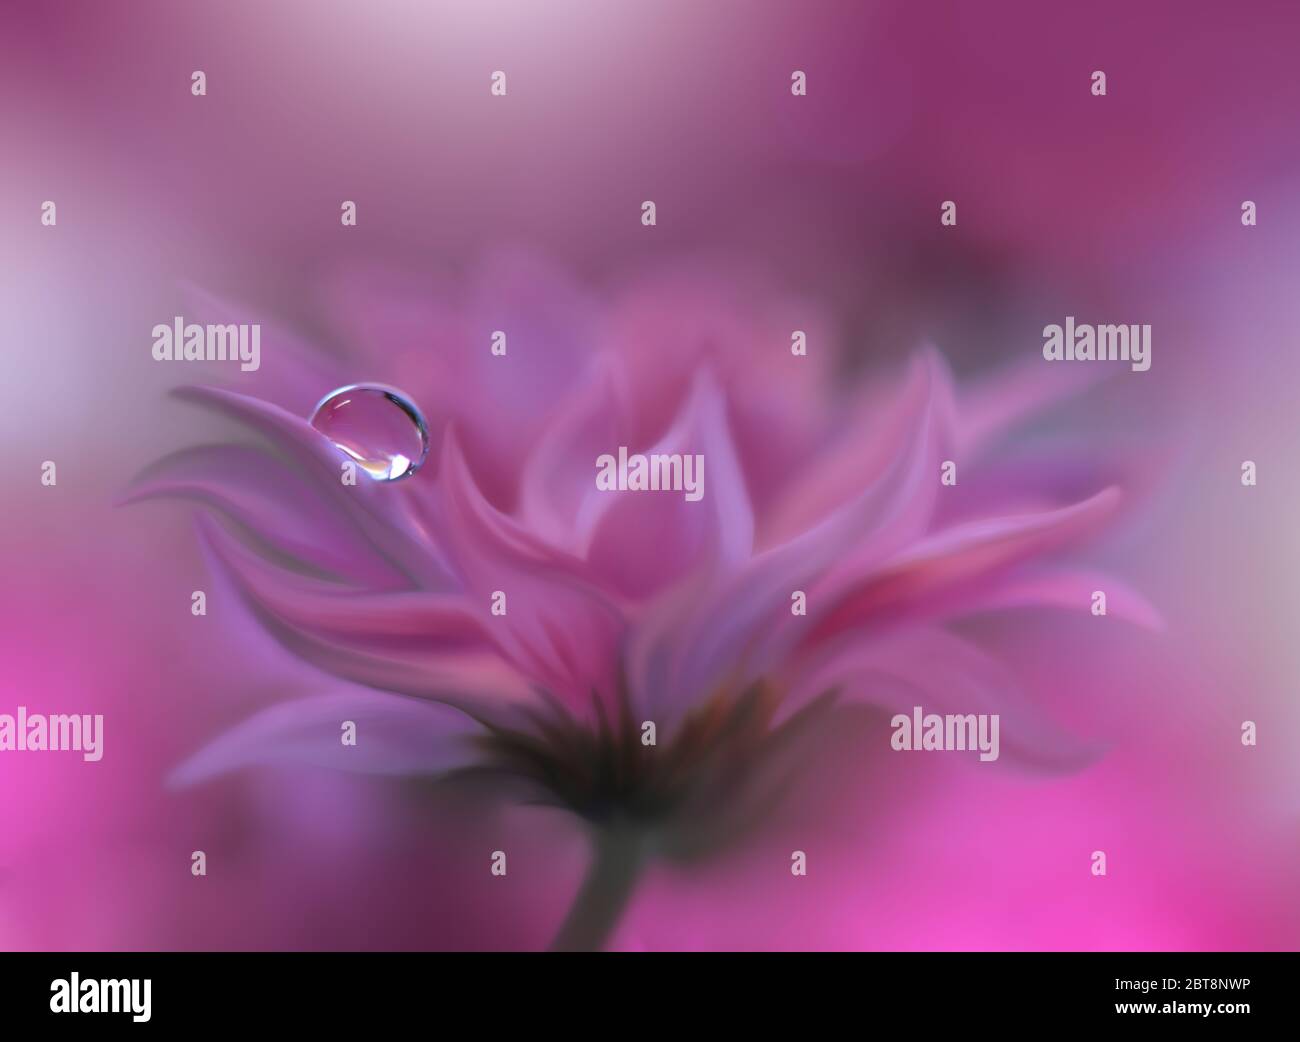 Beautiful Nature Background.Floral Art Design.Abstract Macro Photography.Gerbera Daisy Flower.Violet Background.Creative Artistic Wallpaper.Water Drop Stock Photo